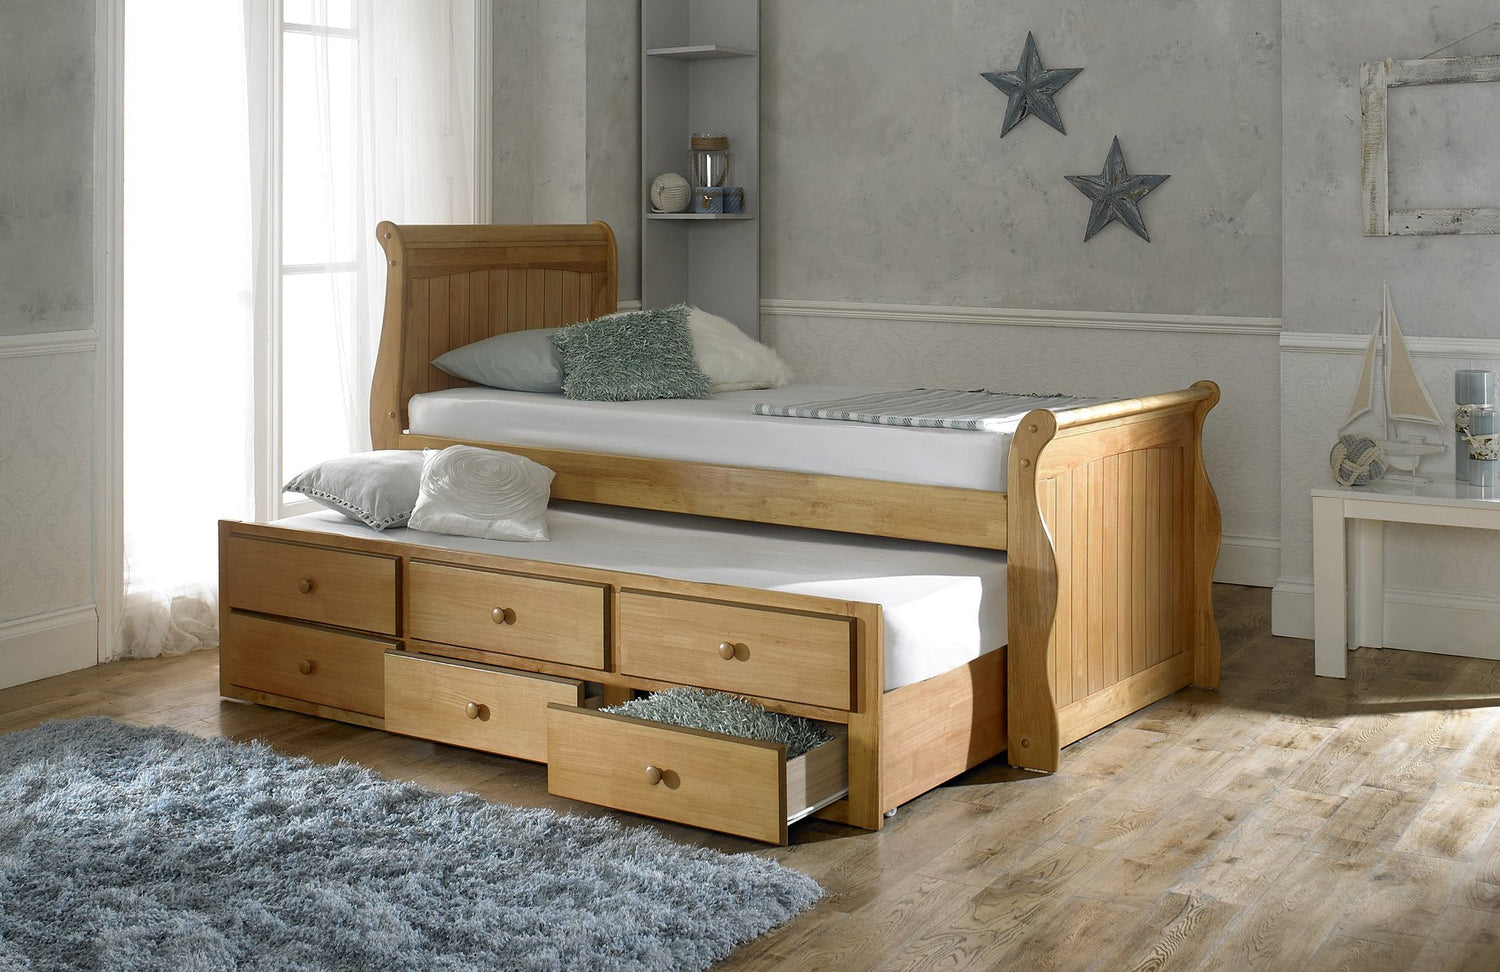 Artisan Bed Company Captain Bed